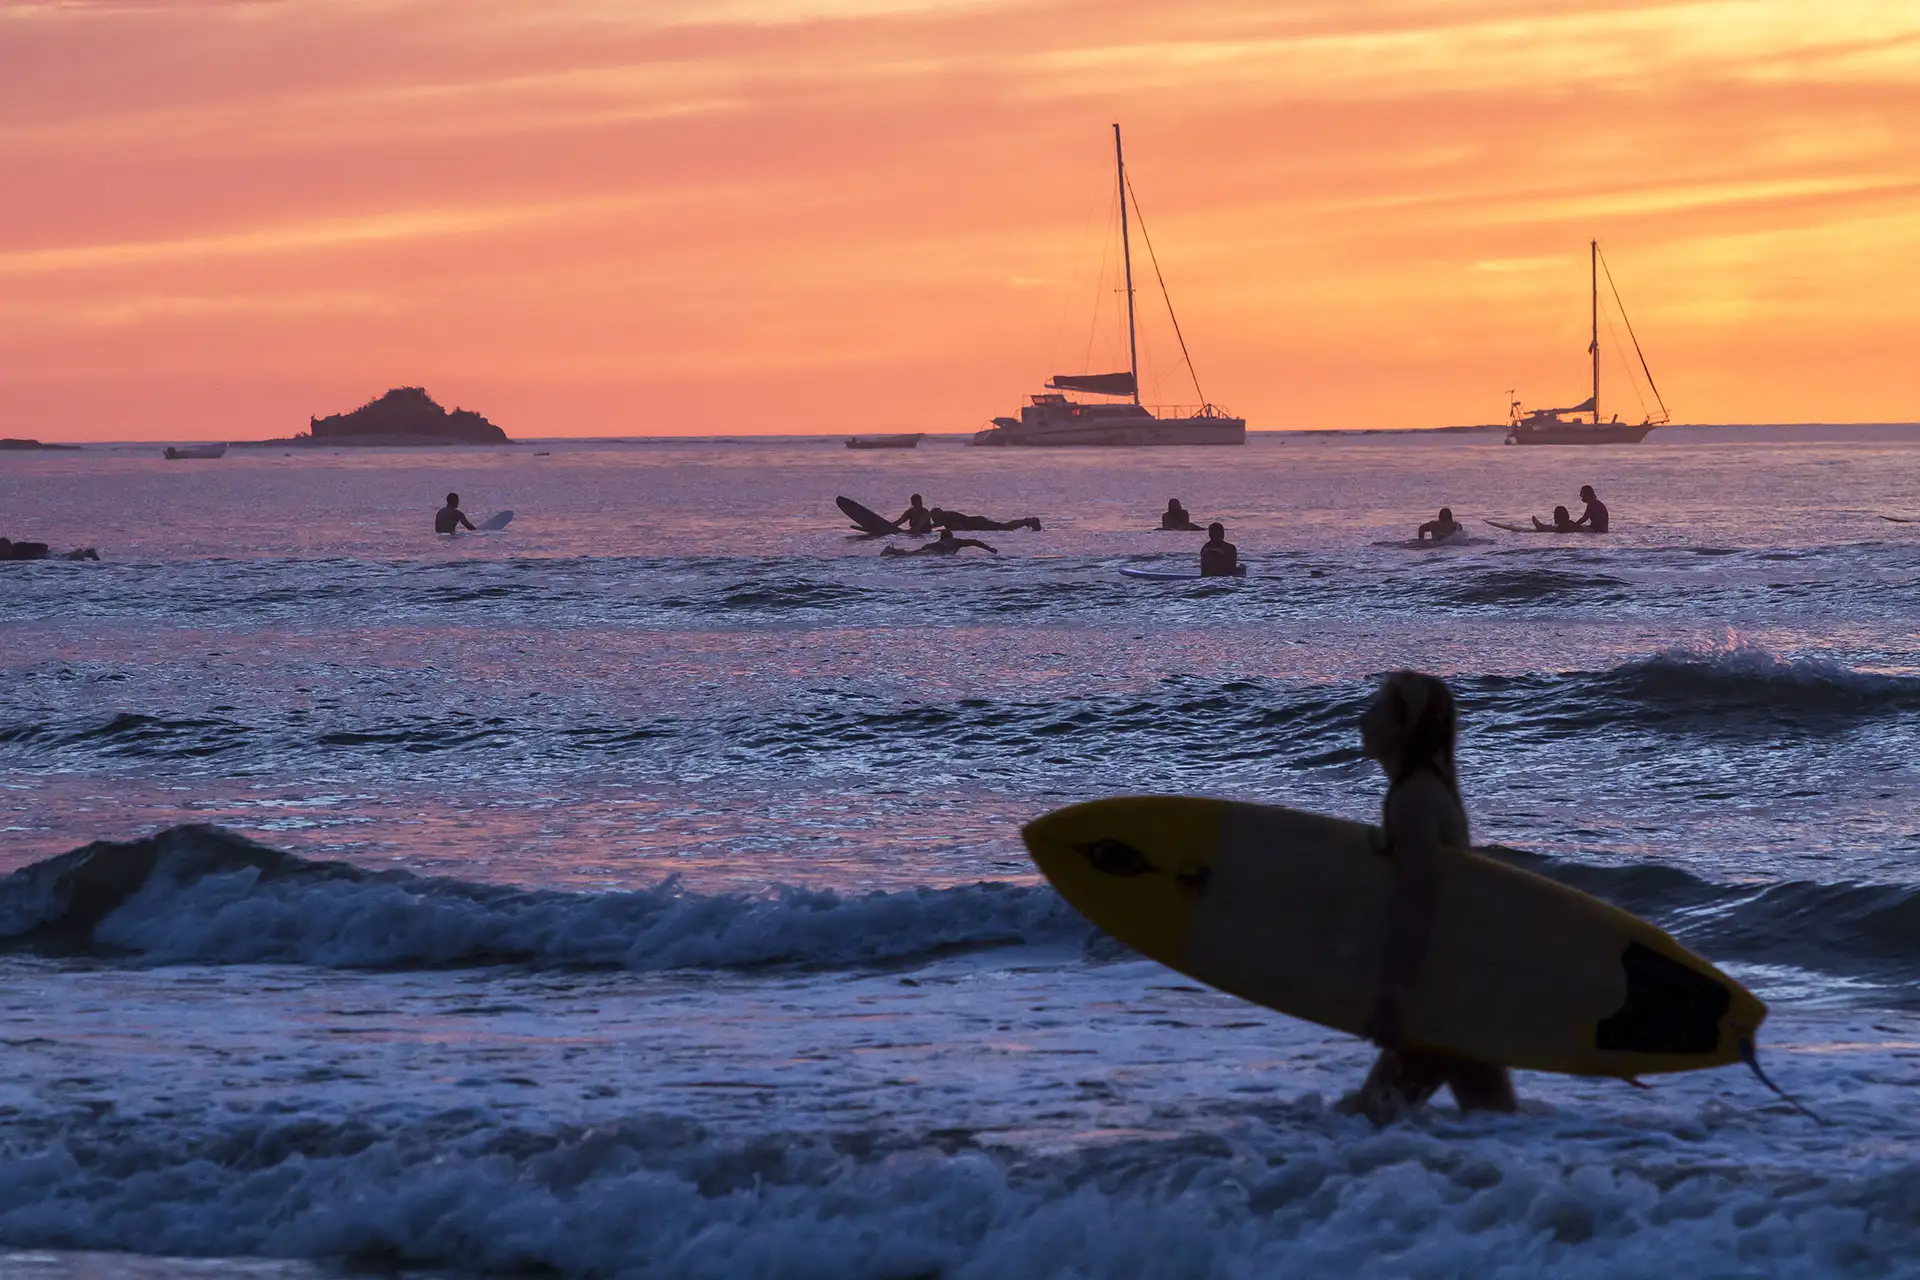 Surfing in Tamarindo, Costa Rica; Courtesy of Colin D. Young/Shutterstock.com